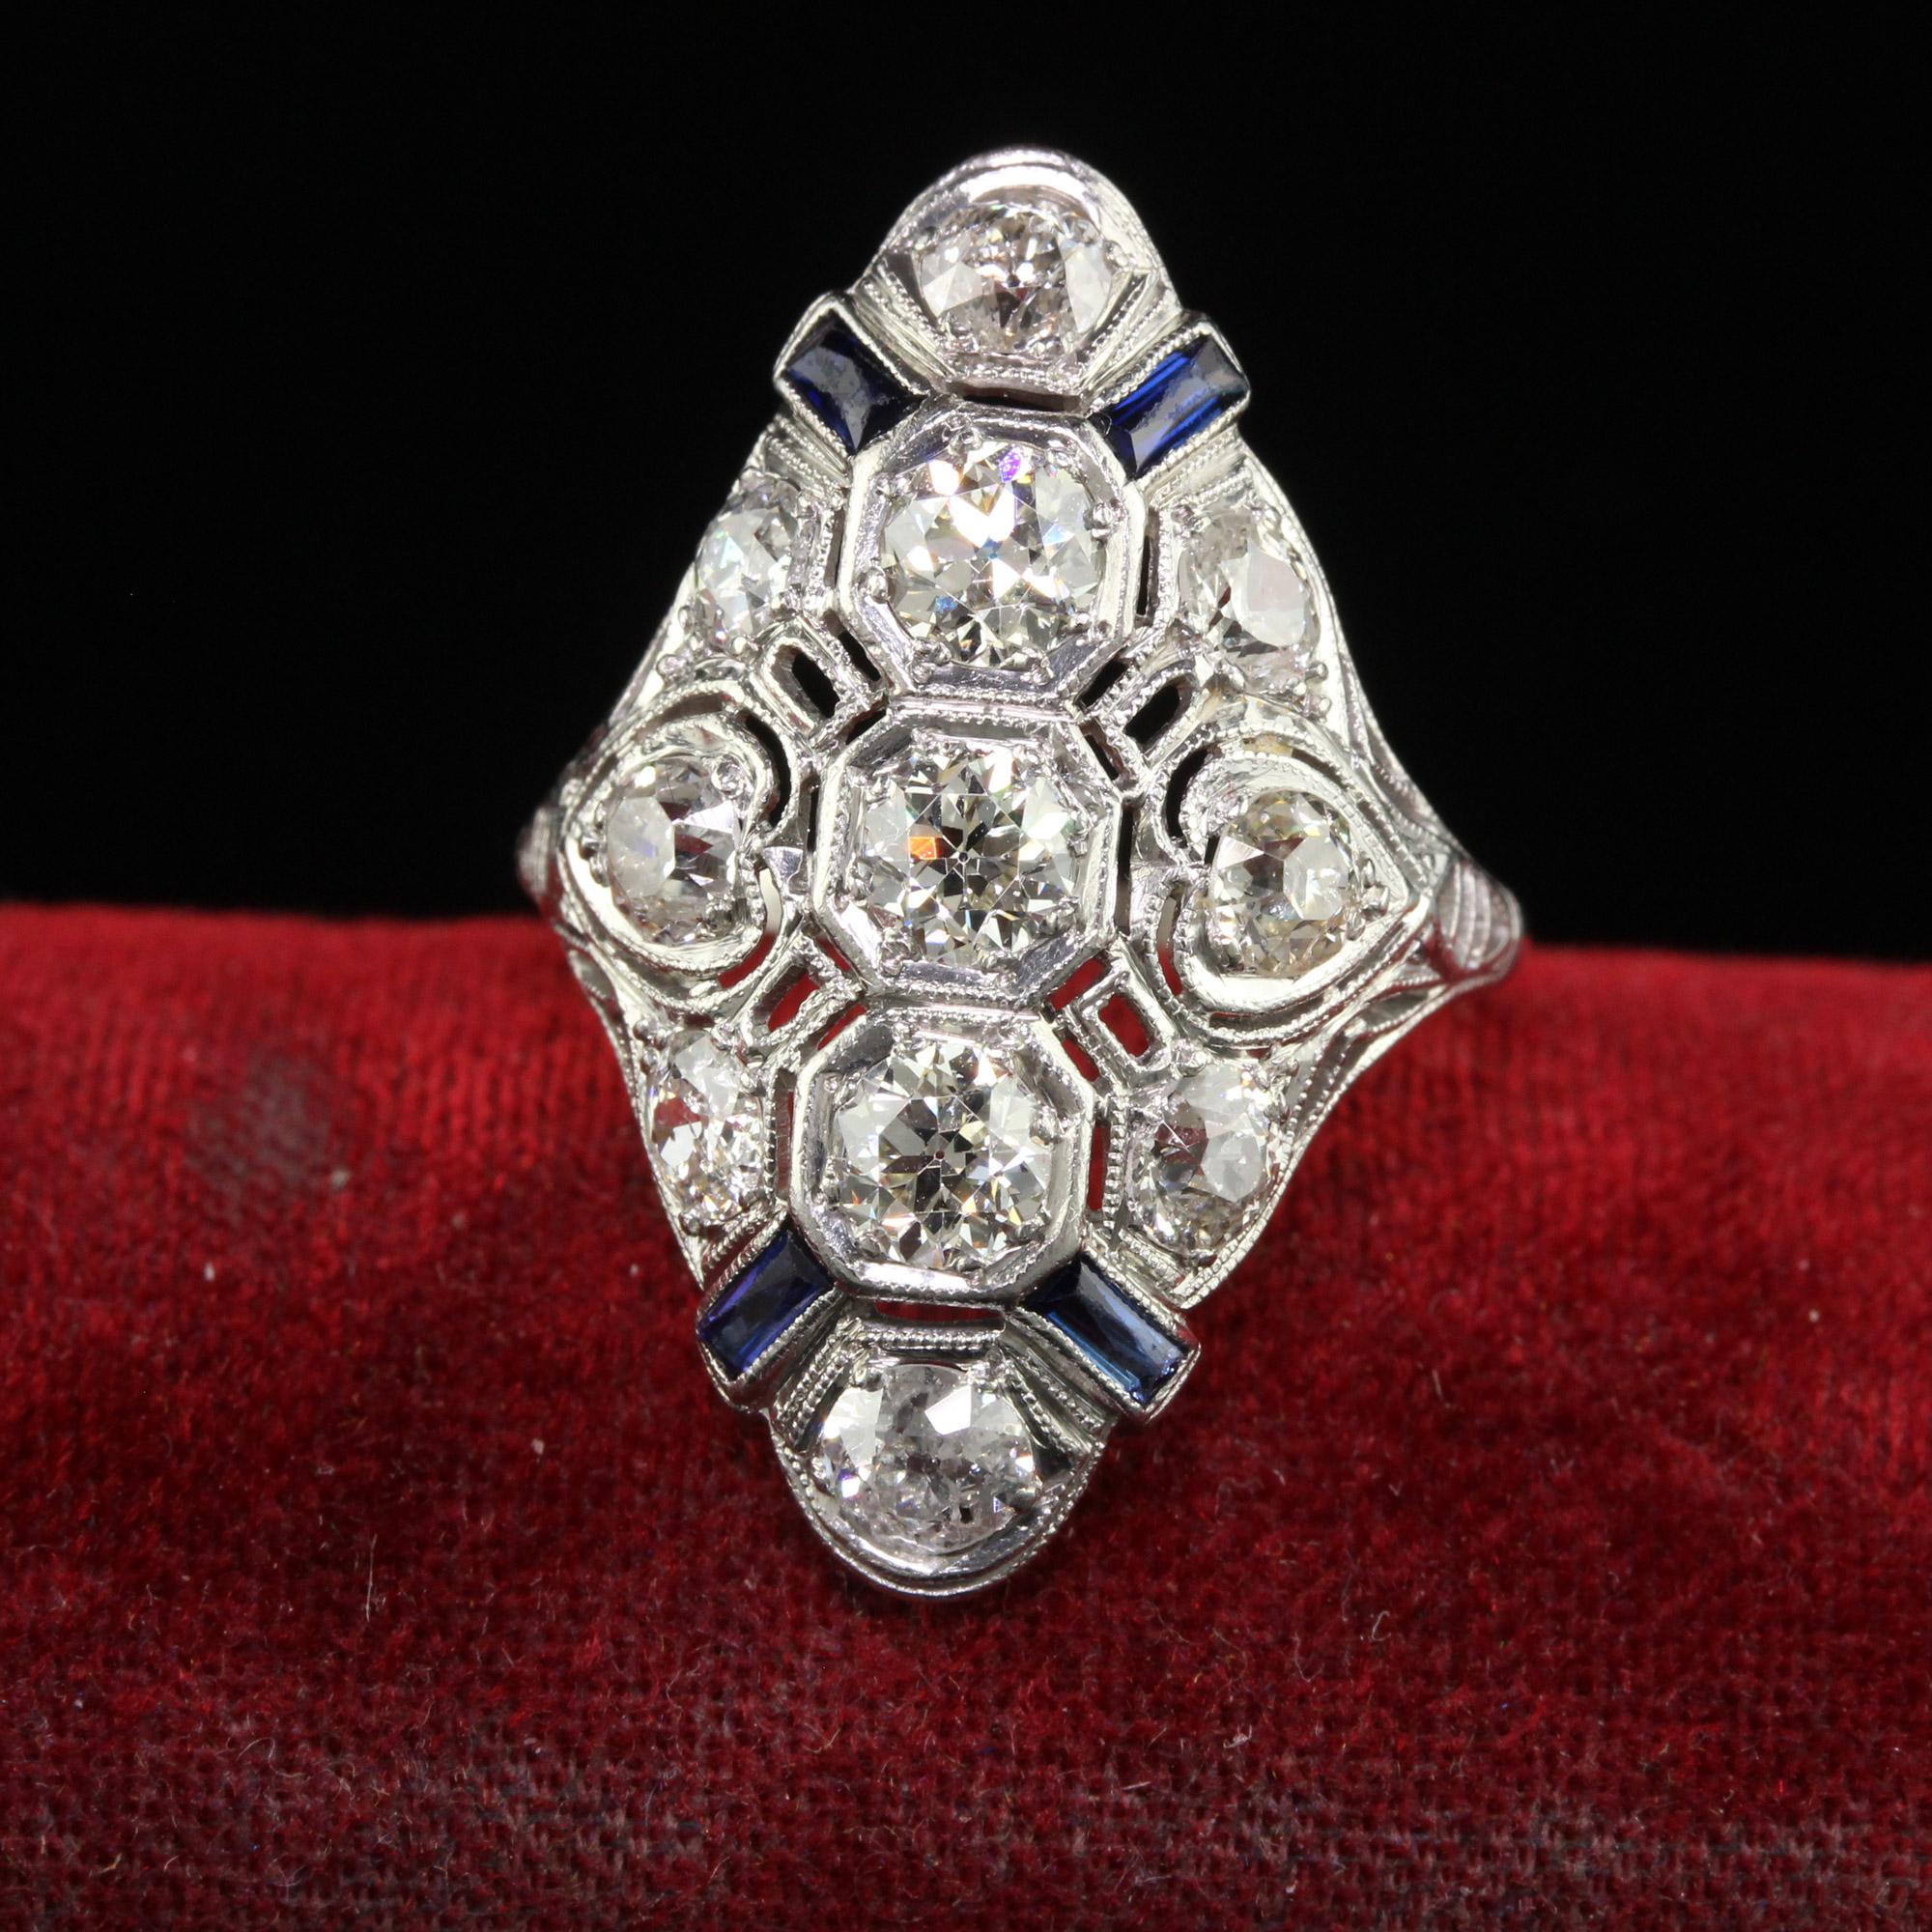 Beautiful Antique Art Deco Platinum Old Mine Diamond and Sapphire Filigree Shield Ring. This gorgeous art deco ring is crafted in platinum. The ring has beautiful chunky old mine cut diamonds set through the ring with French cut sapphire accents.